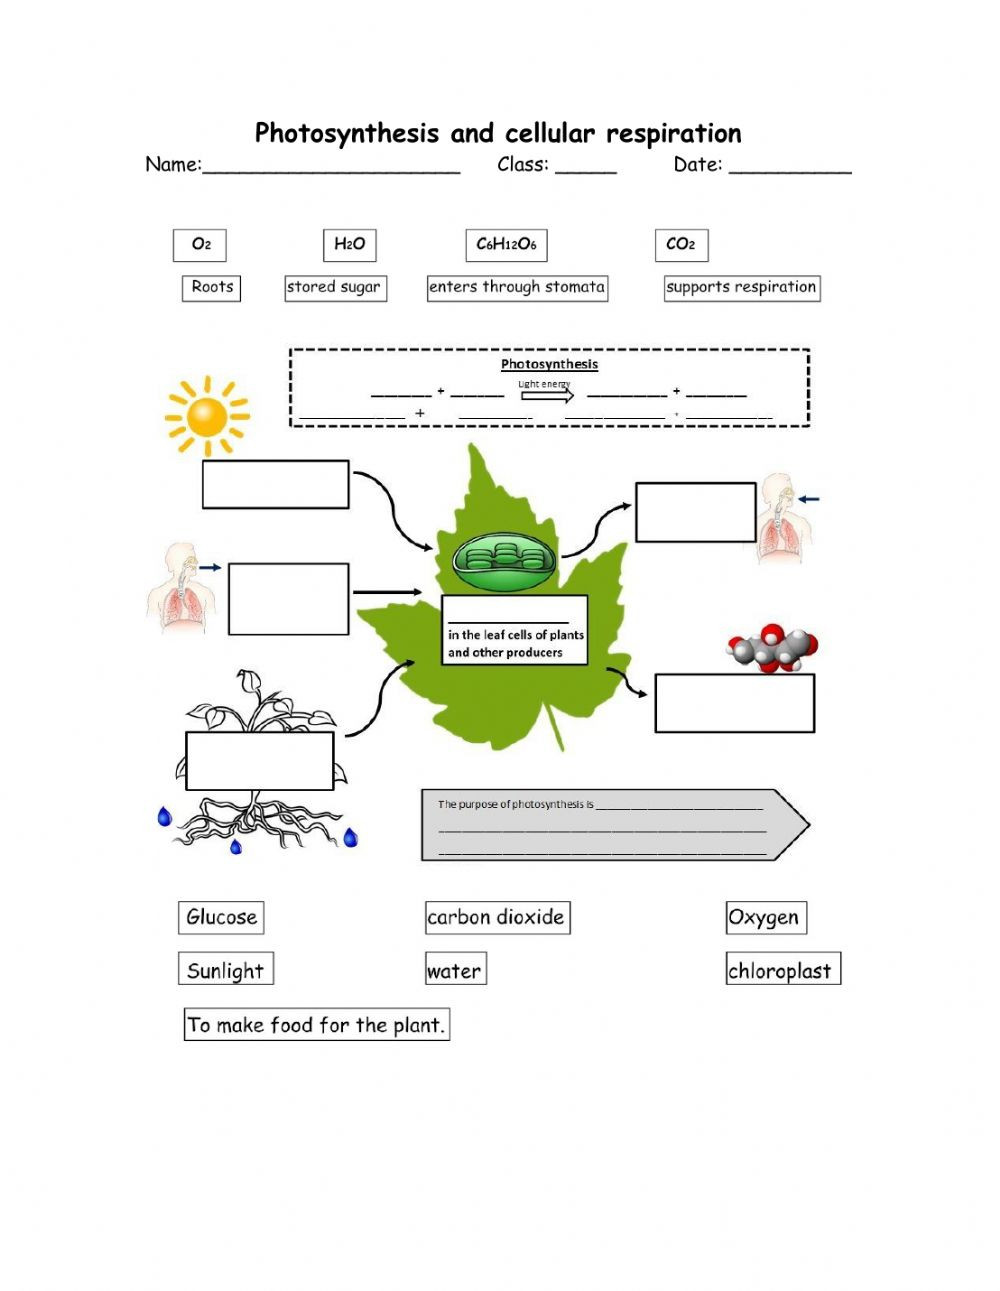 Photosynthesis and Respiration Worksheet Answers Synthesis and Cellular Respiration Interactive Worksheet